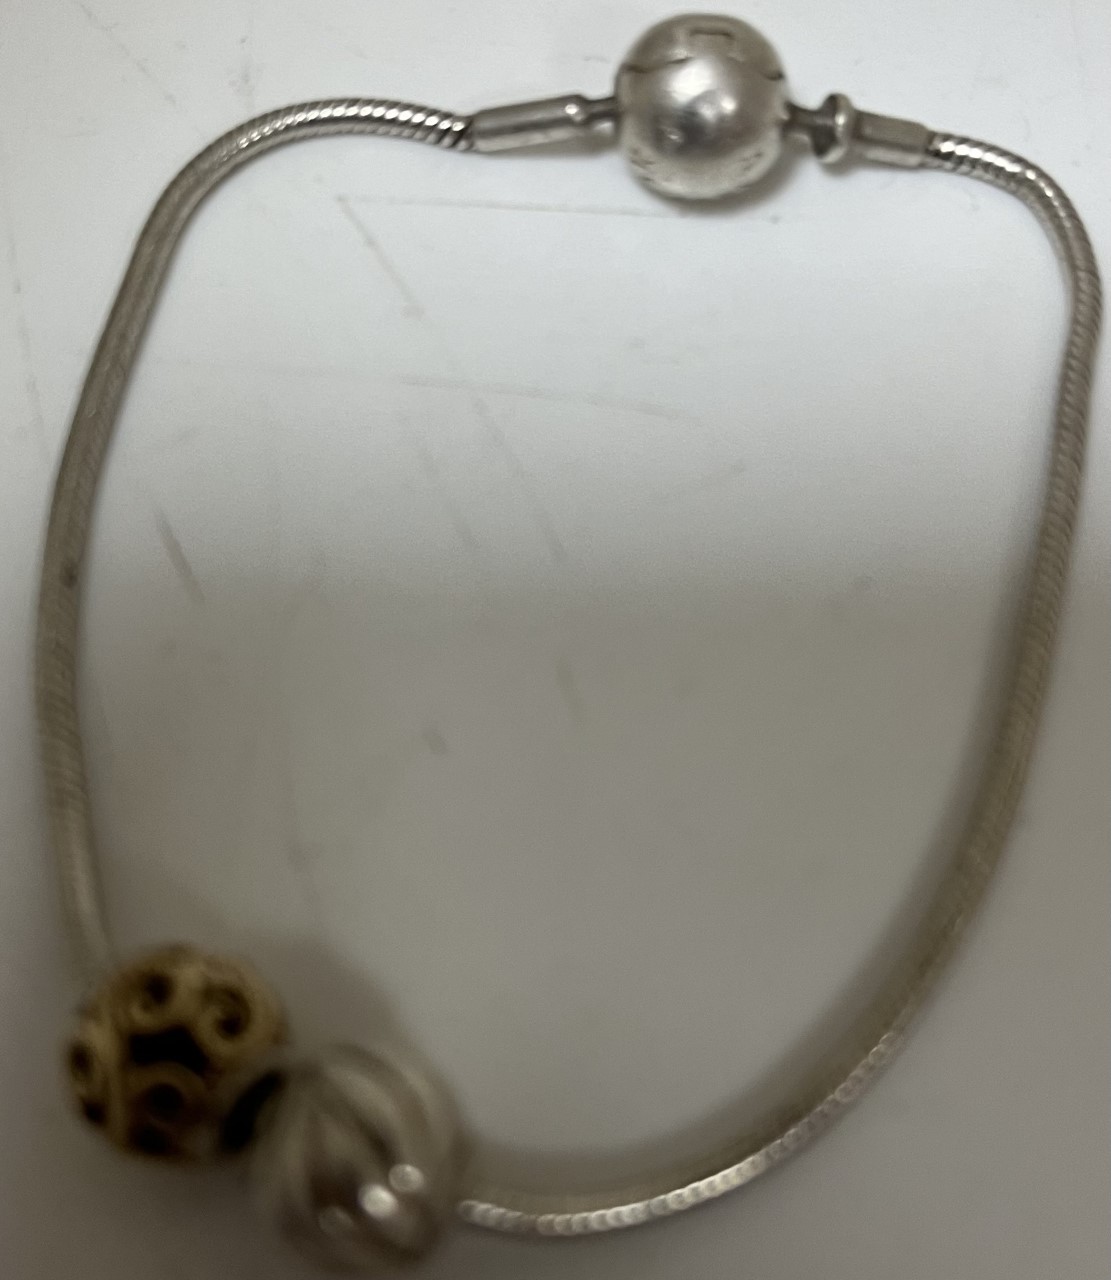 Pandora Bracelet With Two Charms